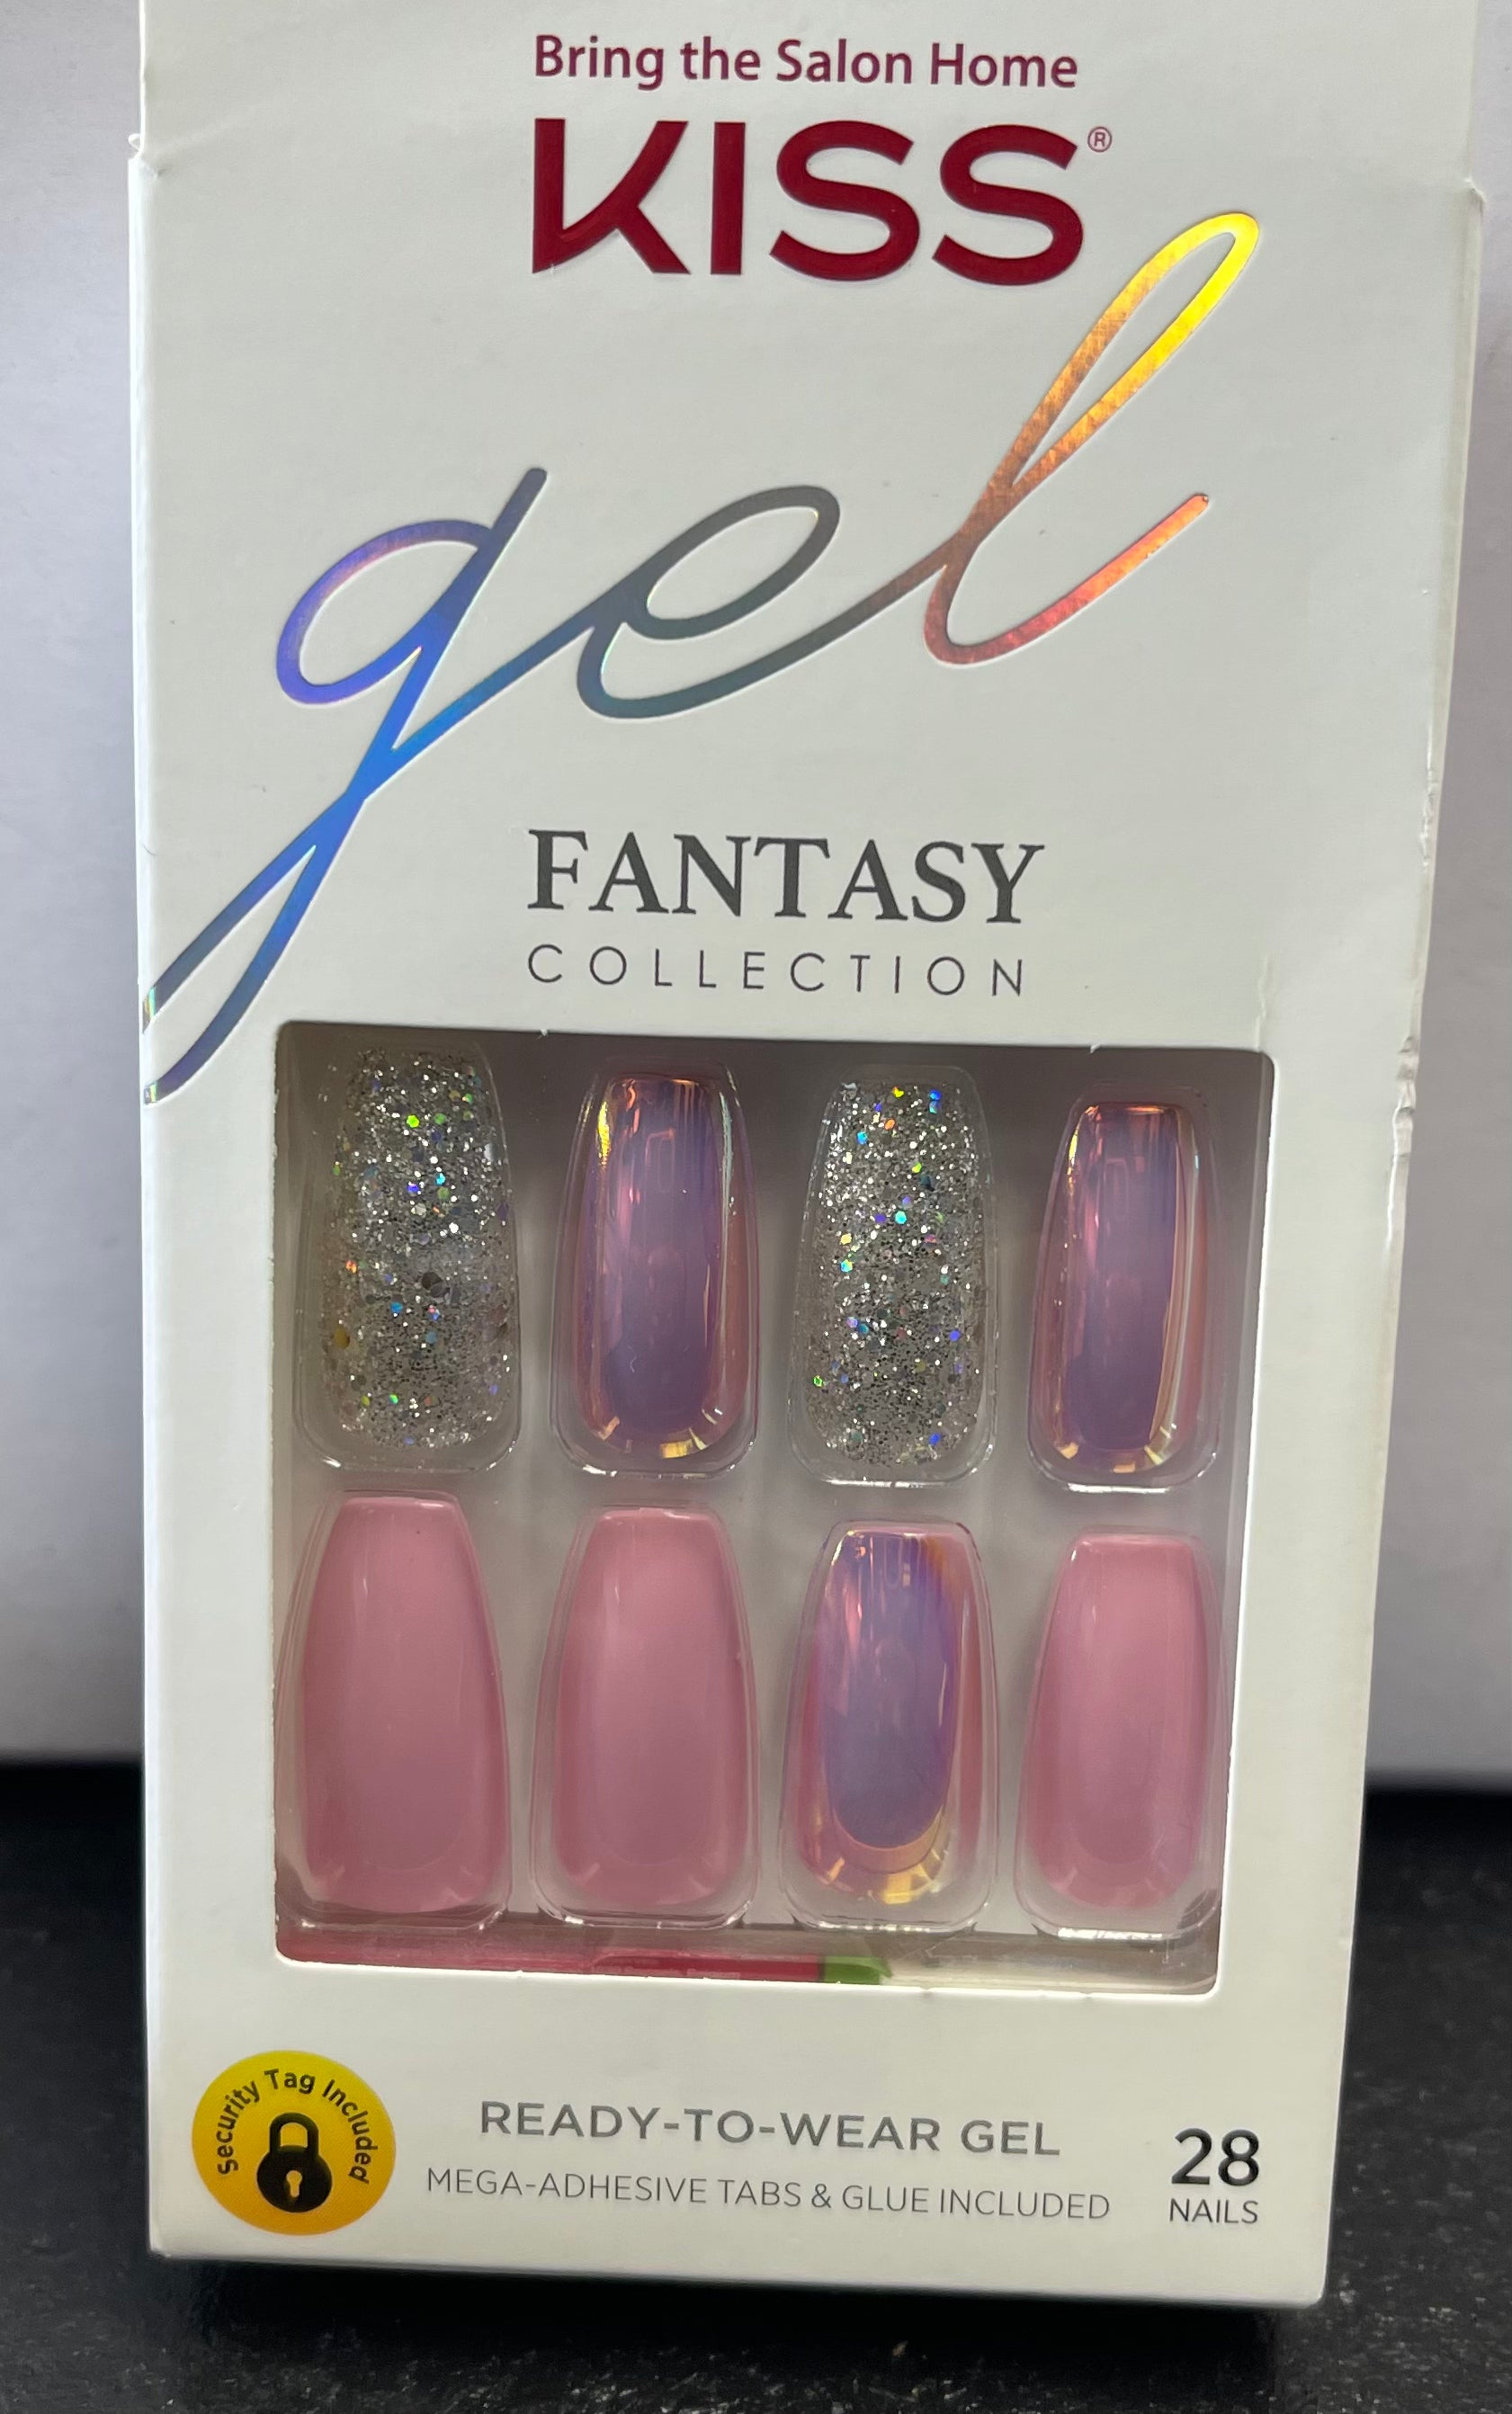 Kiss Gel Fantasy Collection Press On Nails